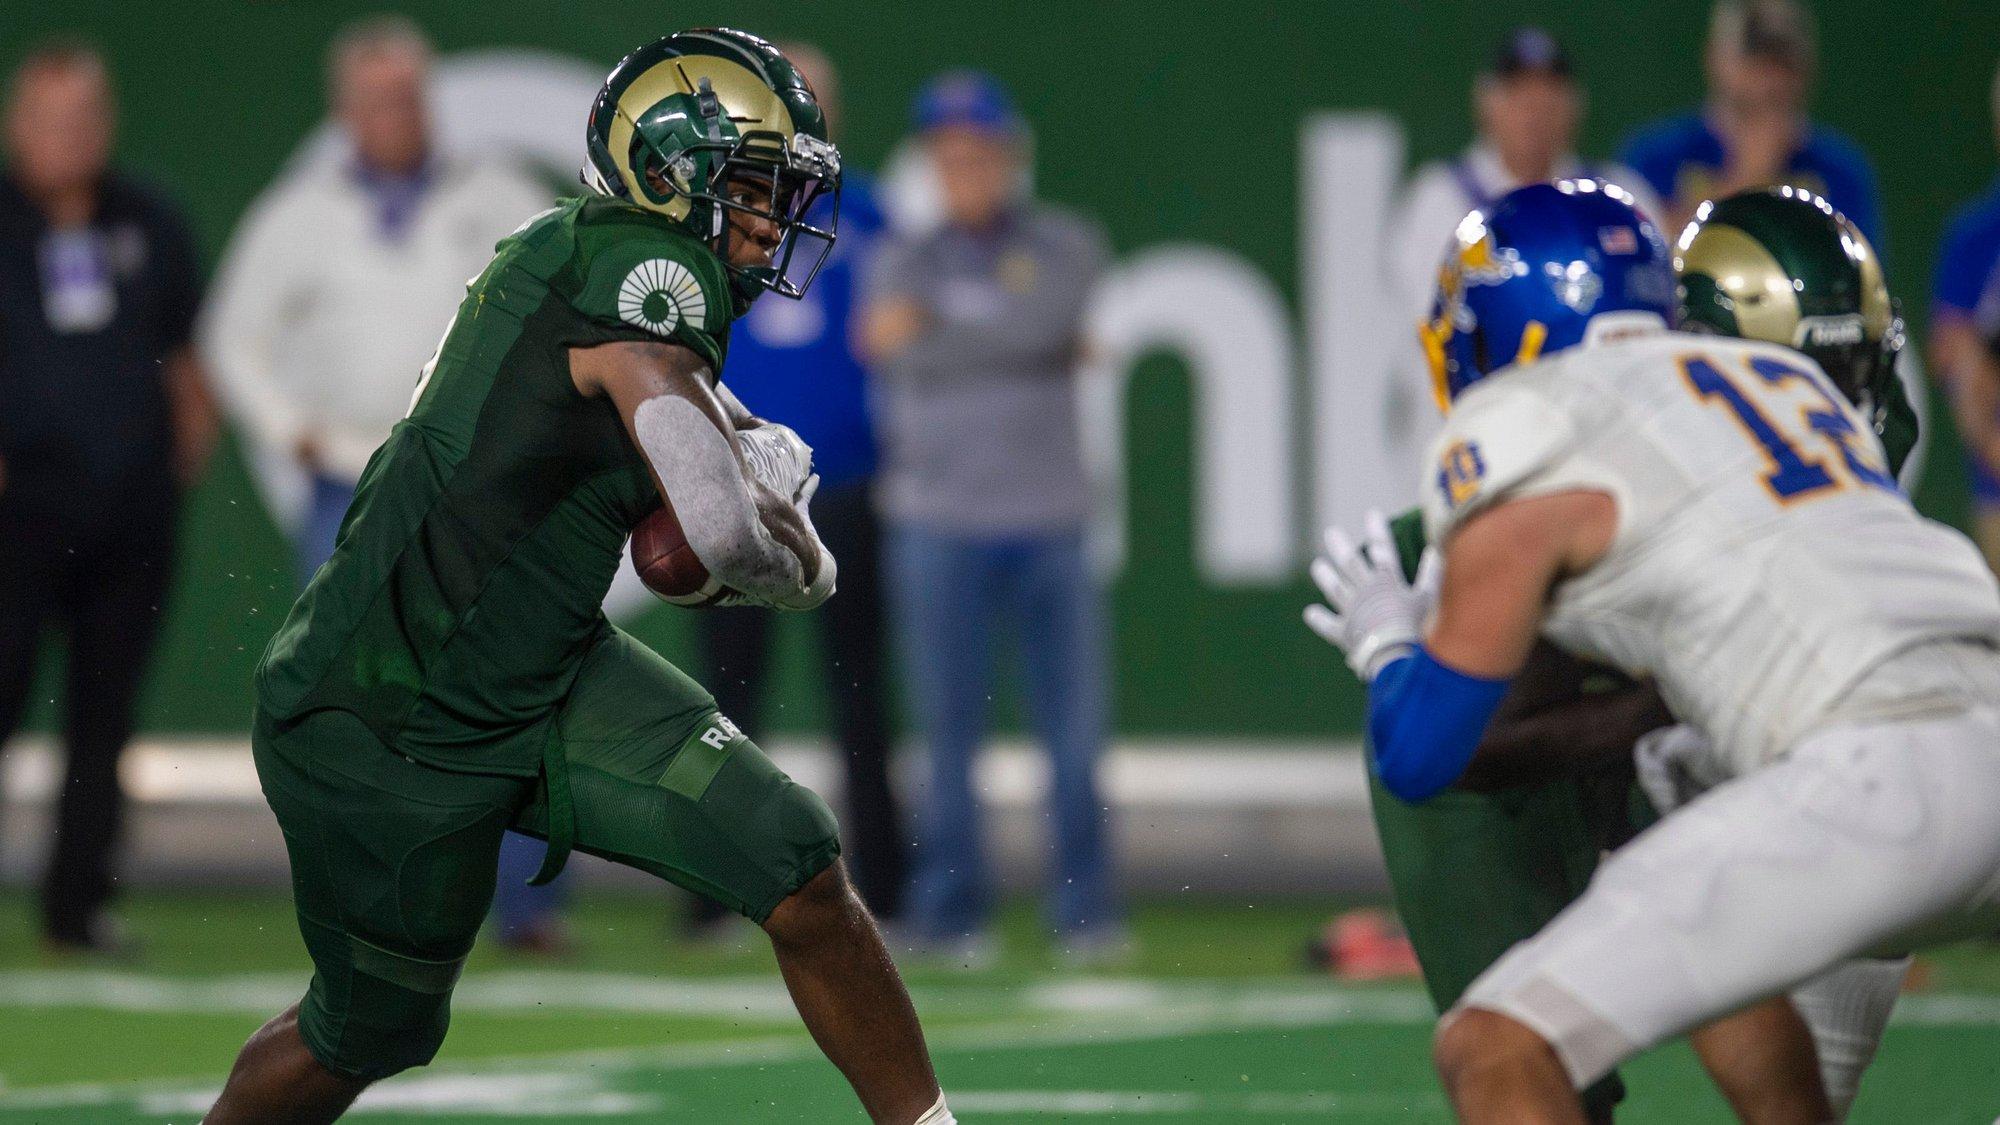 Boise State Broncos vs Colorado State Rams Betting Preview: Will Rams Rebound From Frustrating Finish and Best Boise?